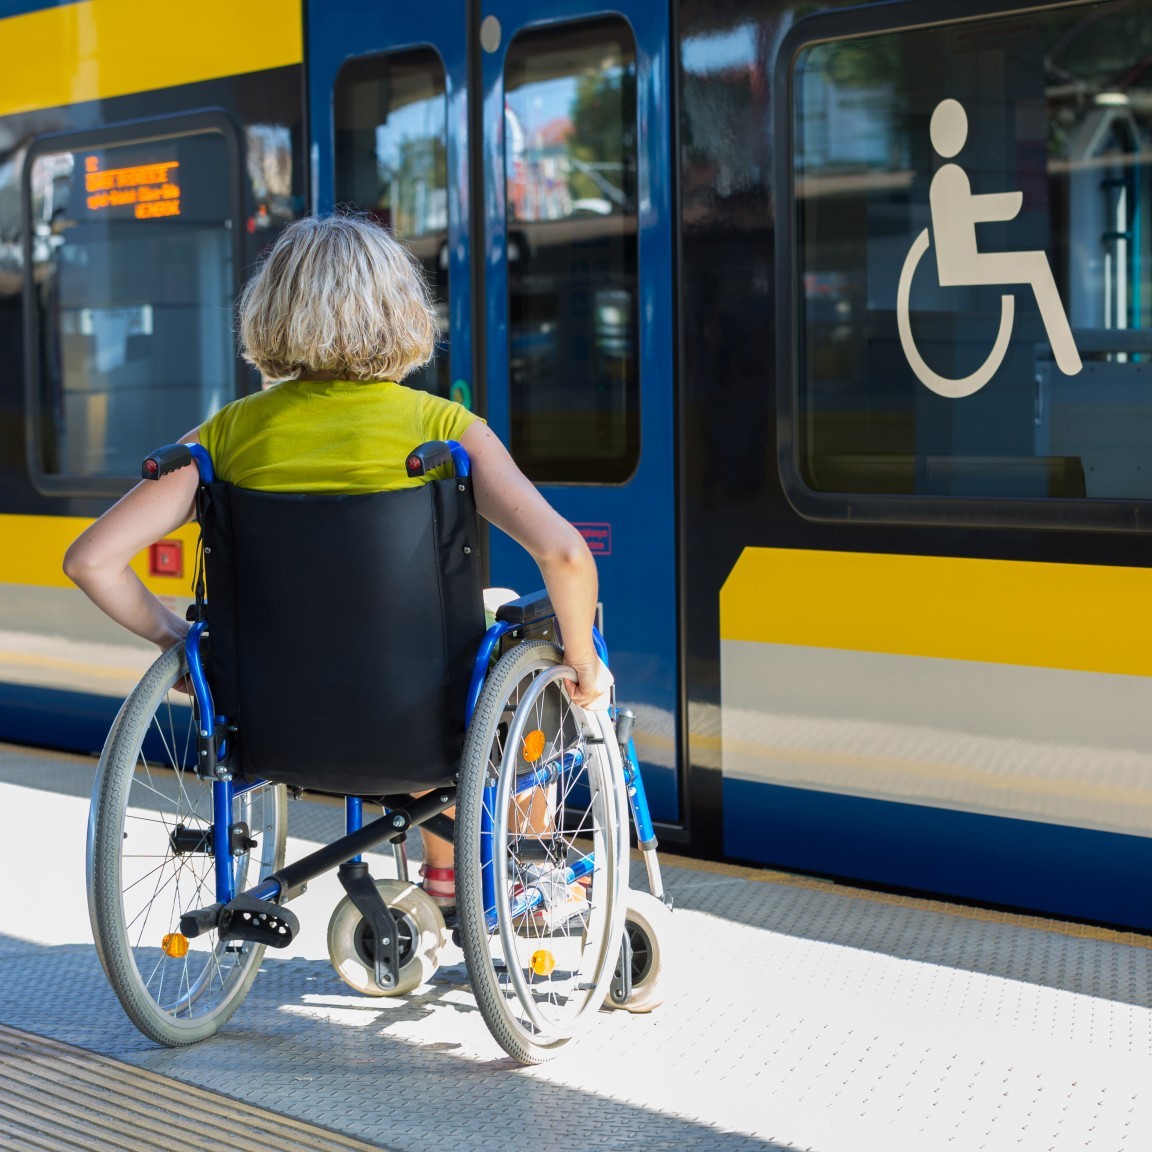 woman in wheelchair about to get on a bus with ISA in window (photo)